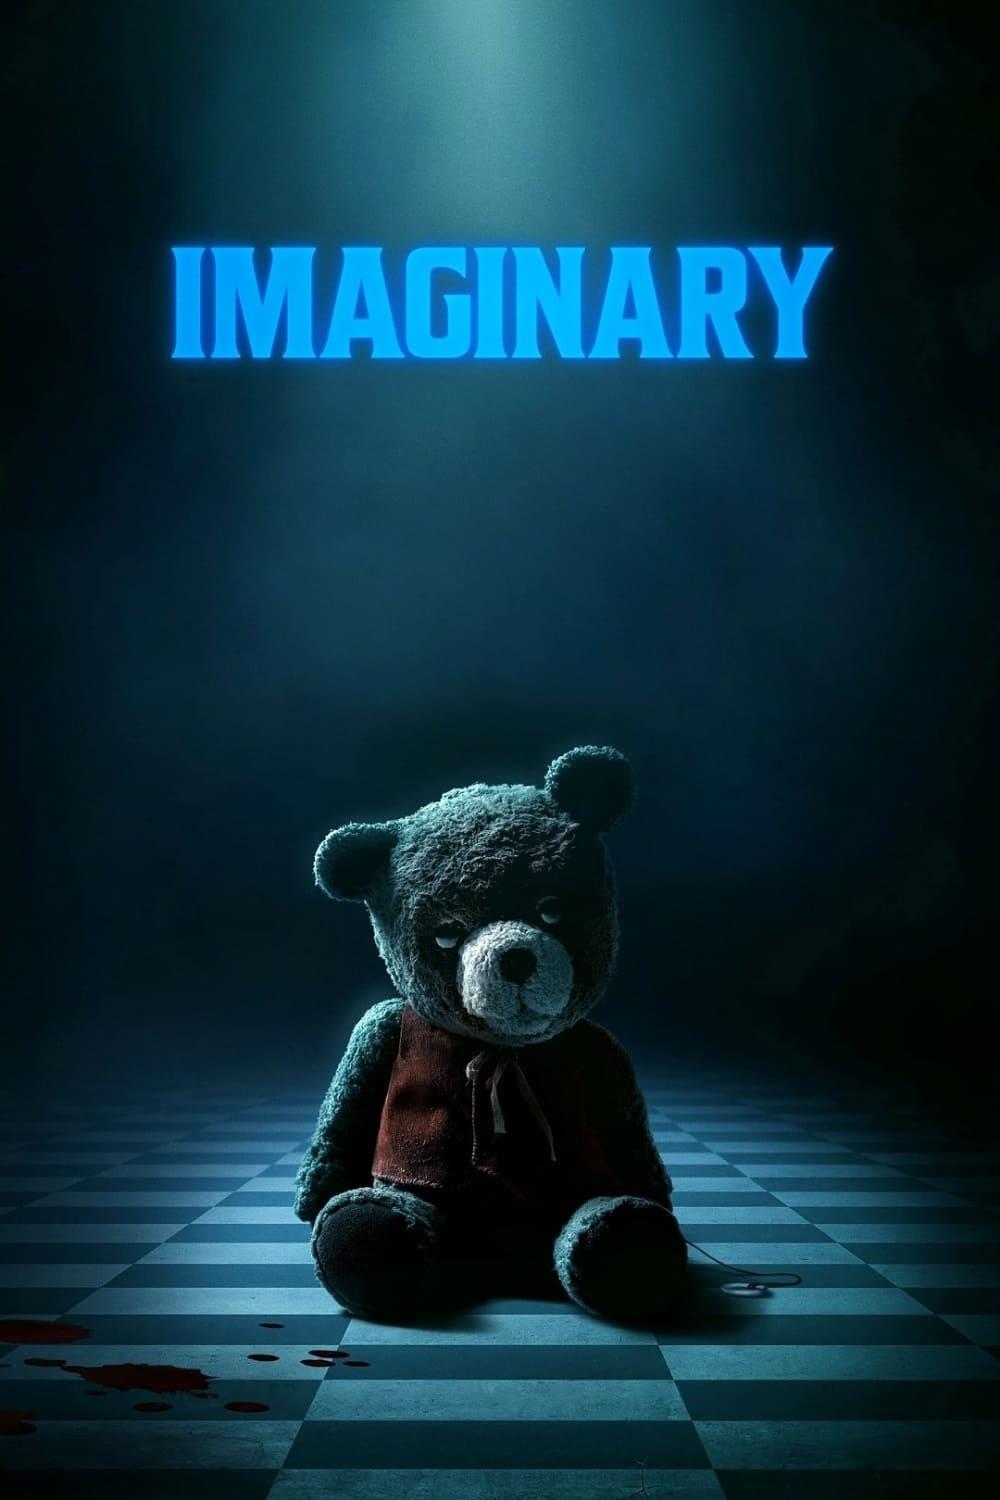 Imaginary poster